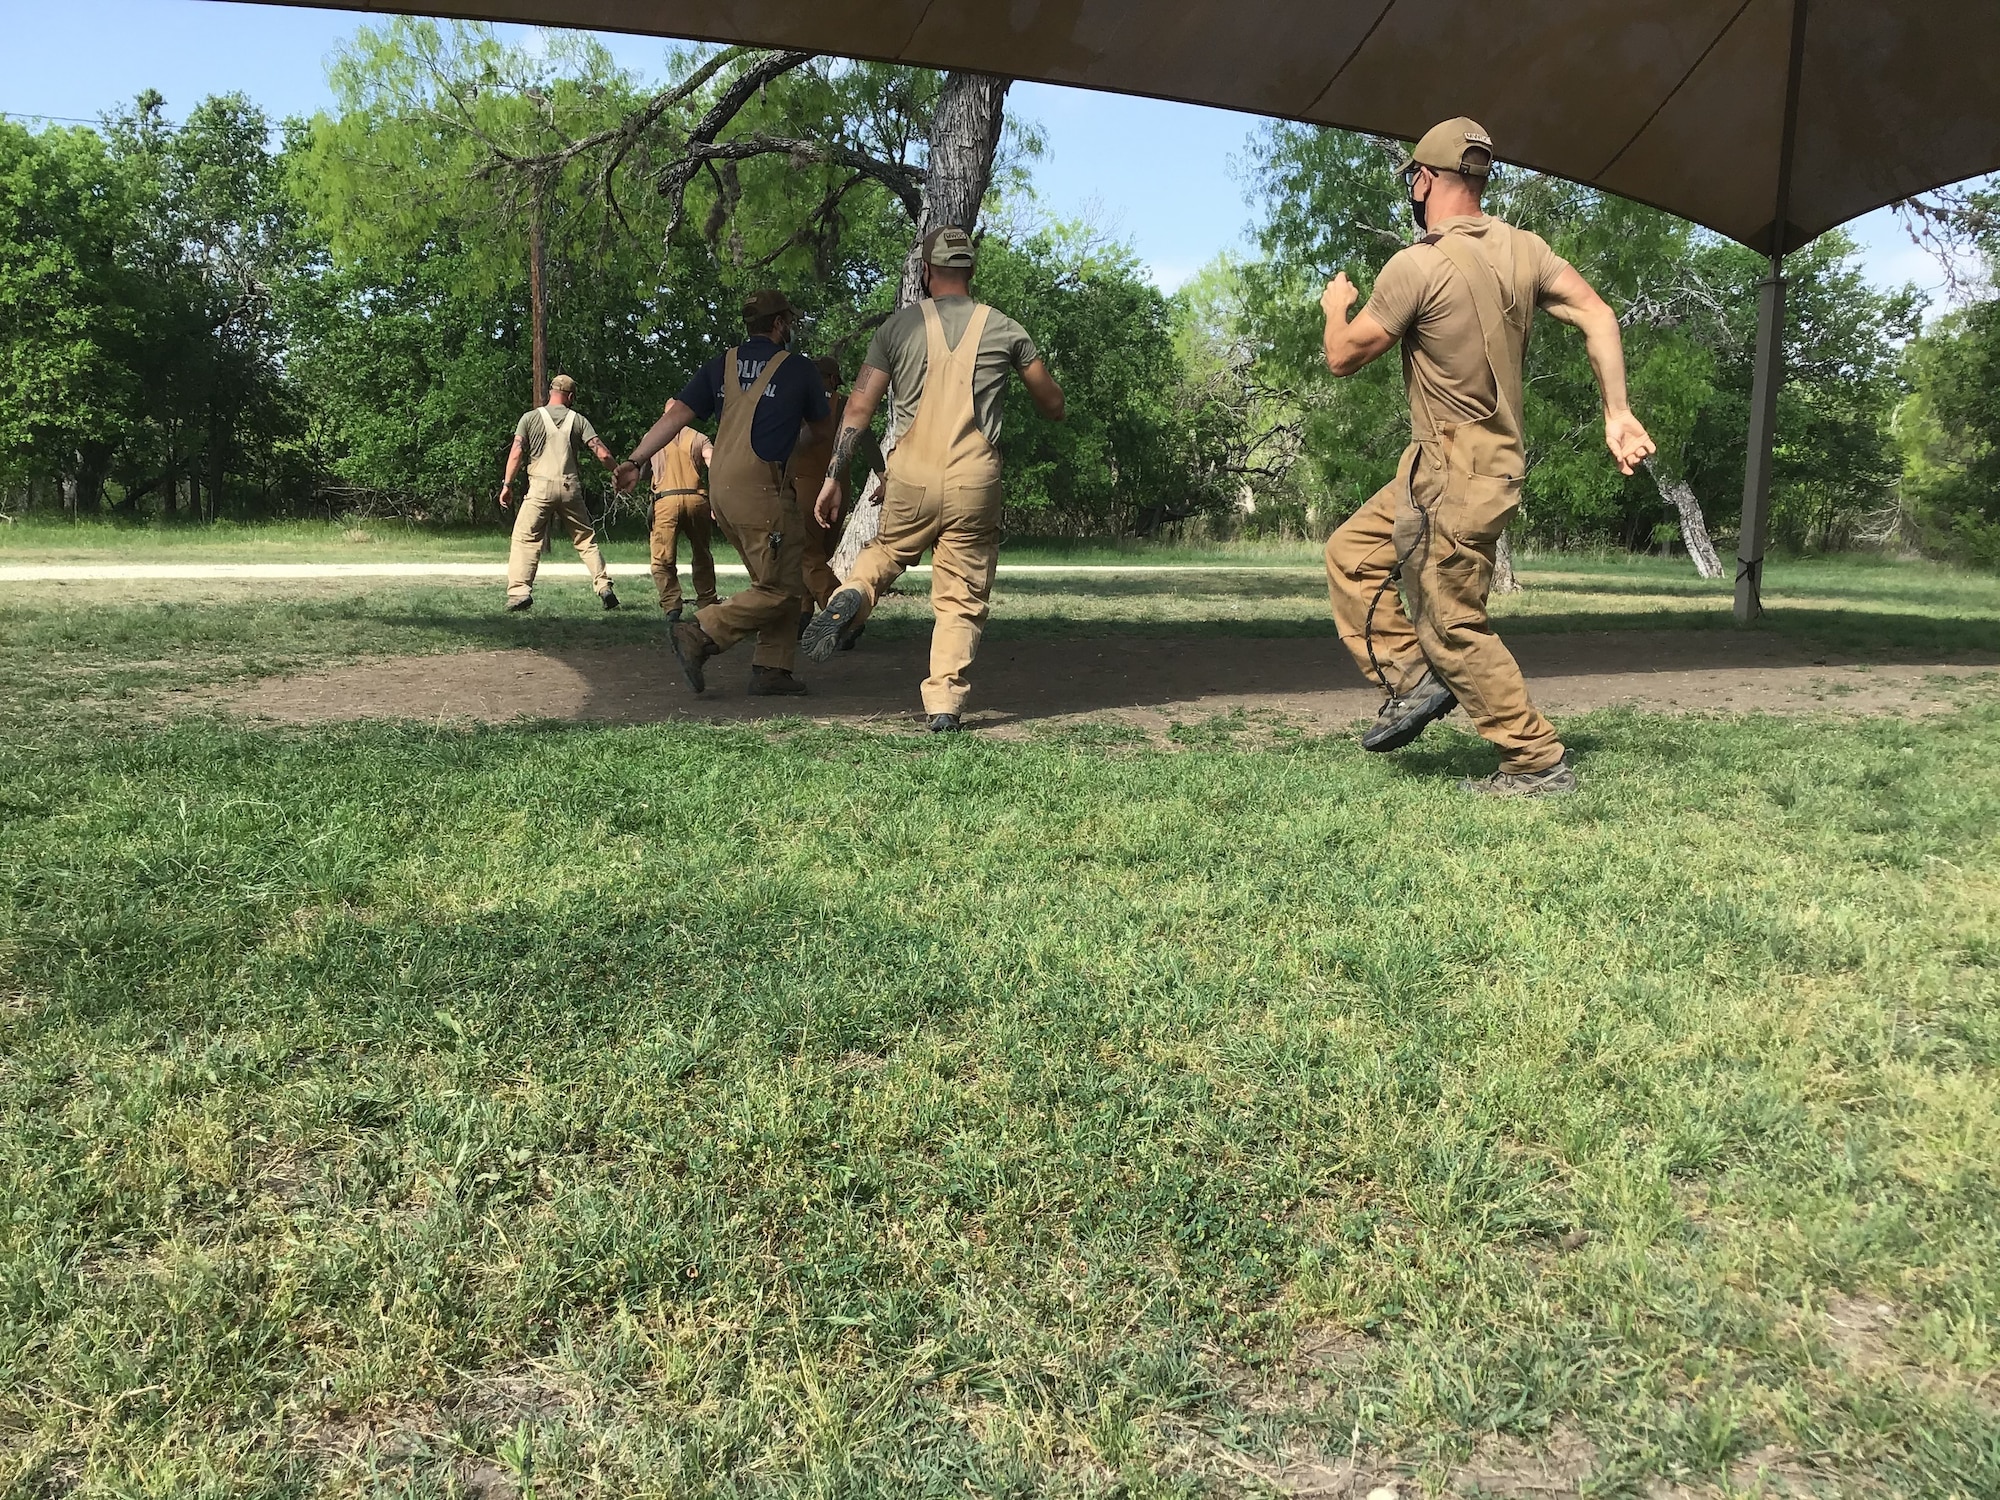 JOINT BASE SAN ANTONIO-CHAPMAN TRAINING ANNEX, Texas – In a physically and mentally demanding occupation, 341st Training Squadron military working dog (MWD) handlers are exposed to risks. These risks are typically workplace injuries.